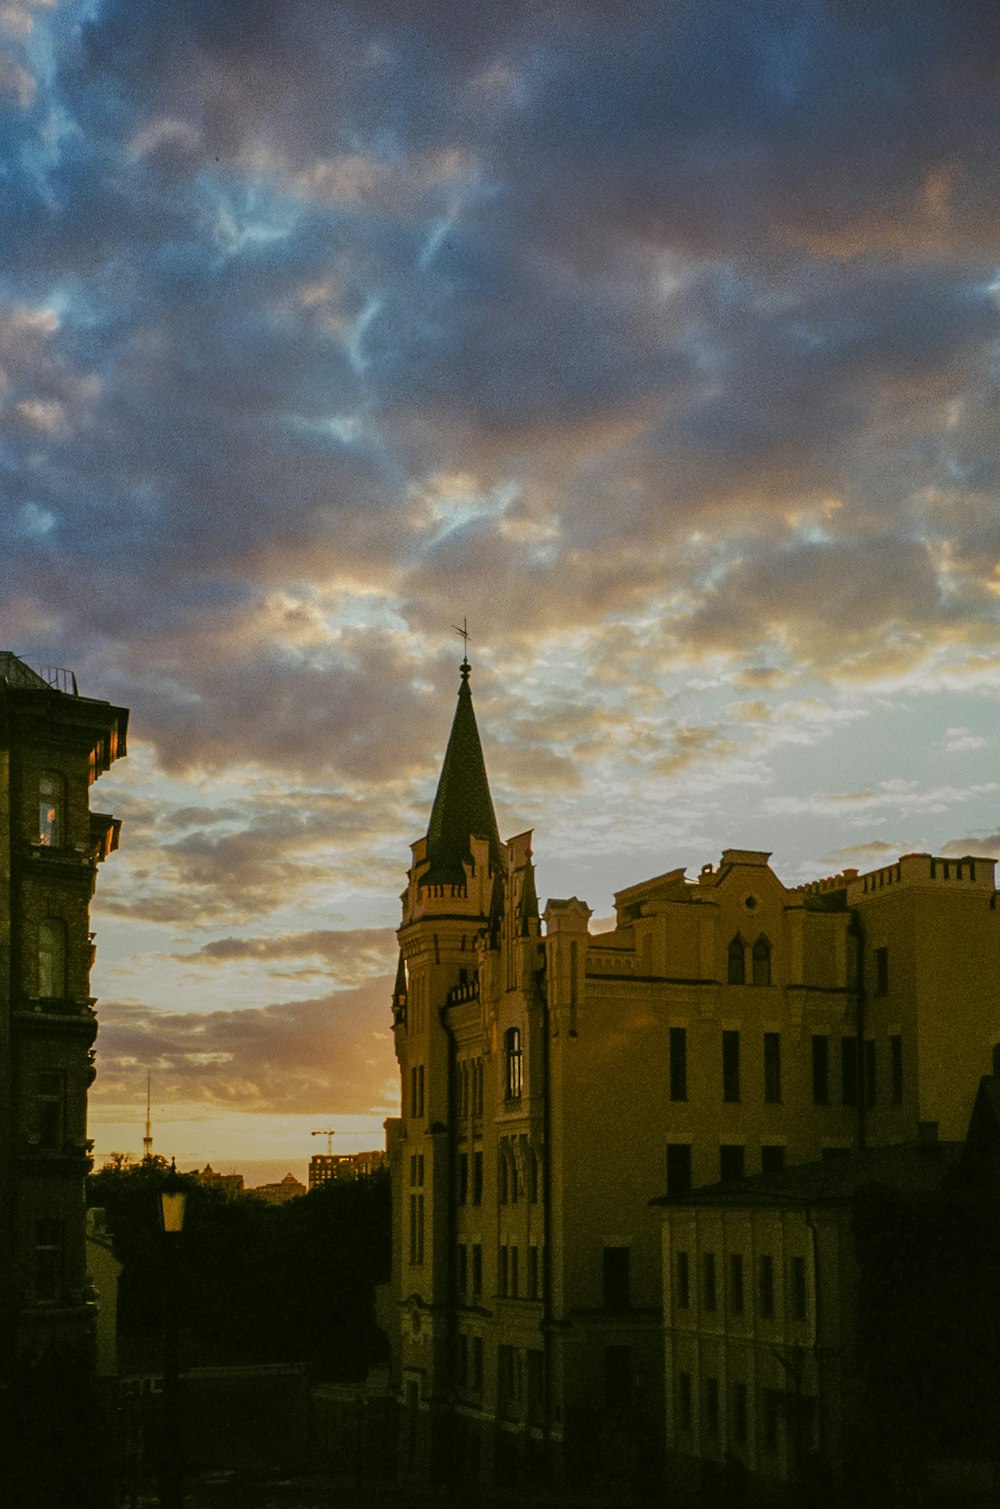 a view of a building with a clock tower at sunset